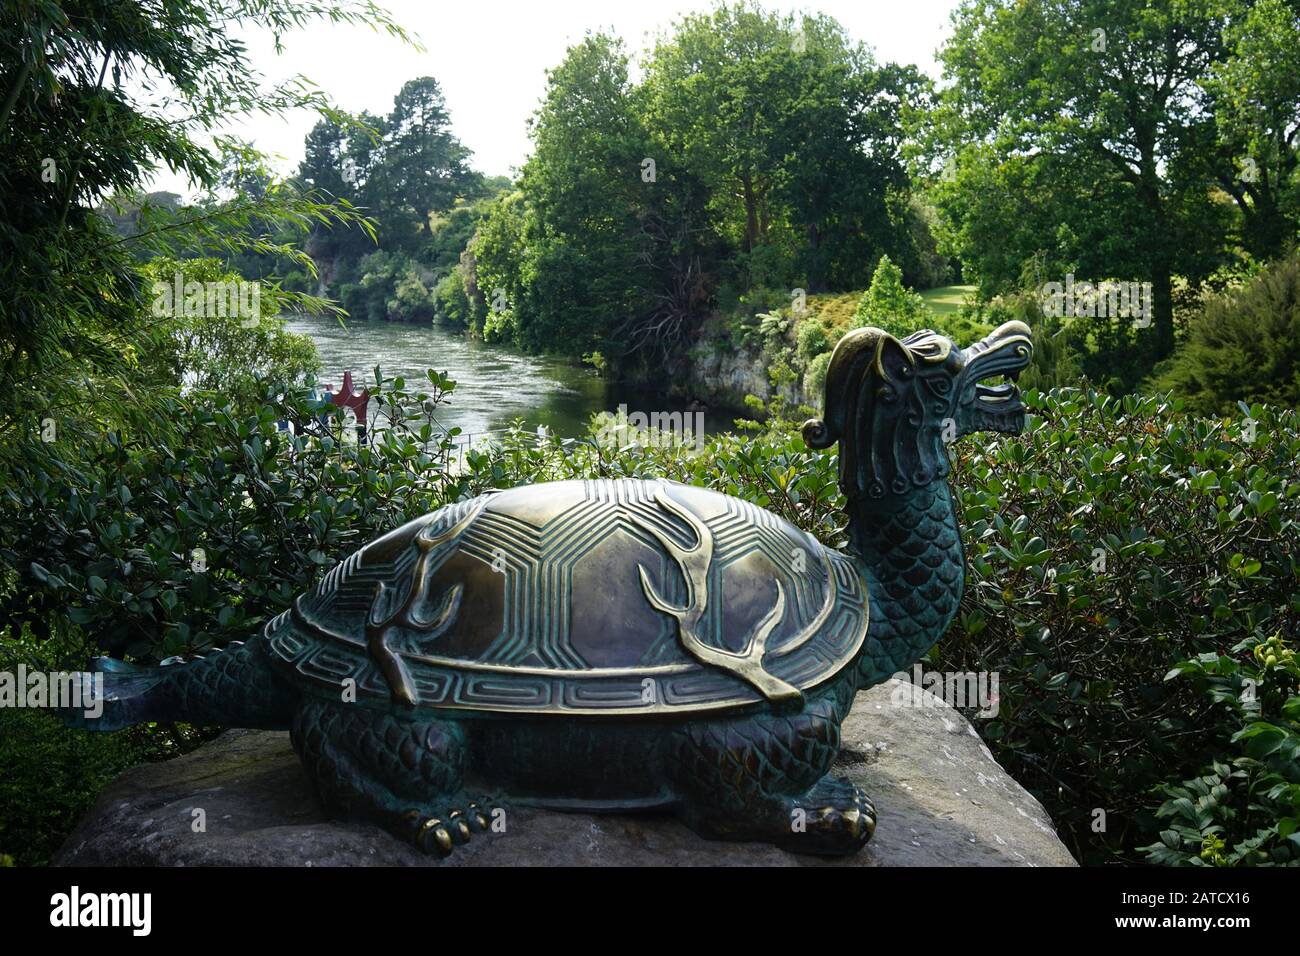 Beautiful statue of a dragon-turtle on a stone near the bank of a river in the park Stock Photo